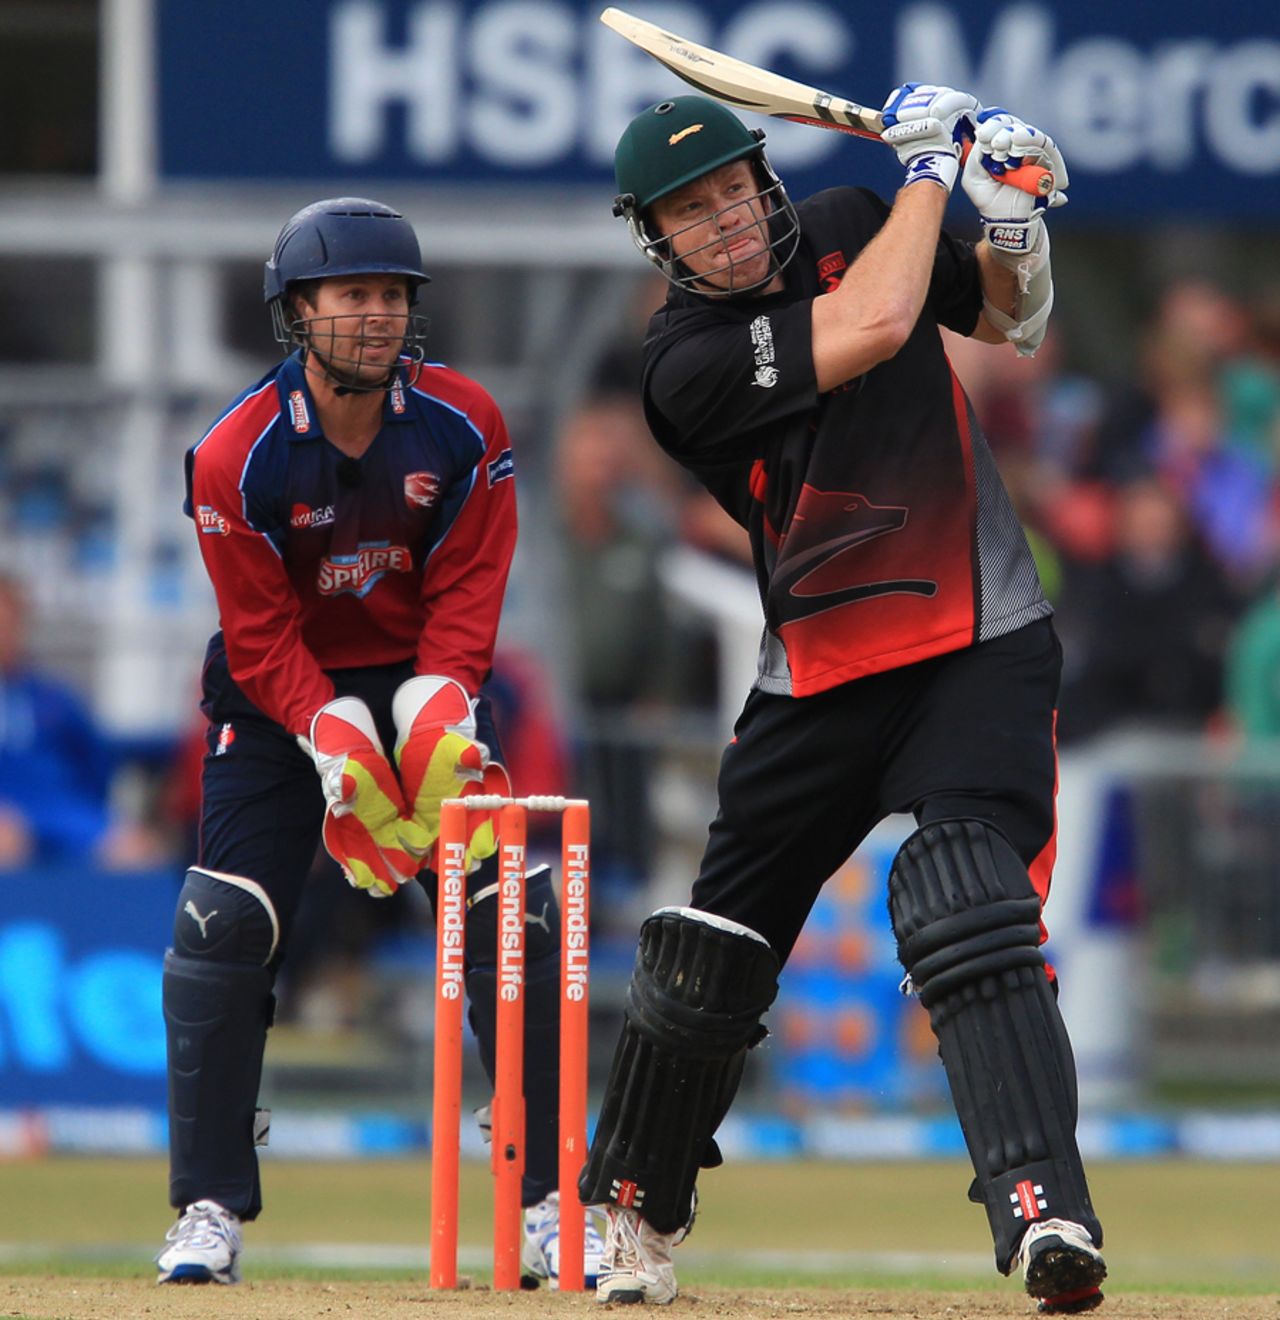 Andrew McDonald's half-century laid the foundation to Leicestershire's victory, Leicestershire v Kent, Friends Life t20, 1st Quarter Final, Grace Road 